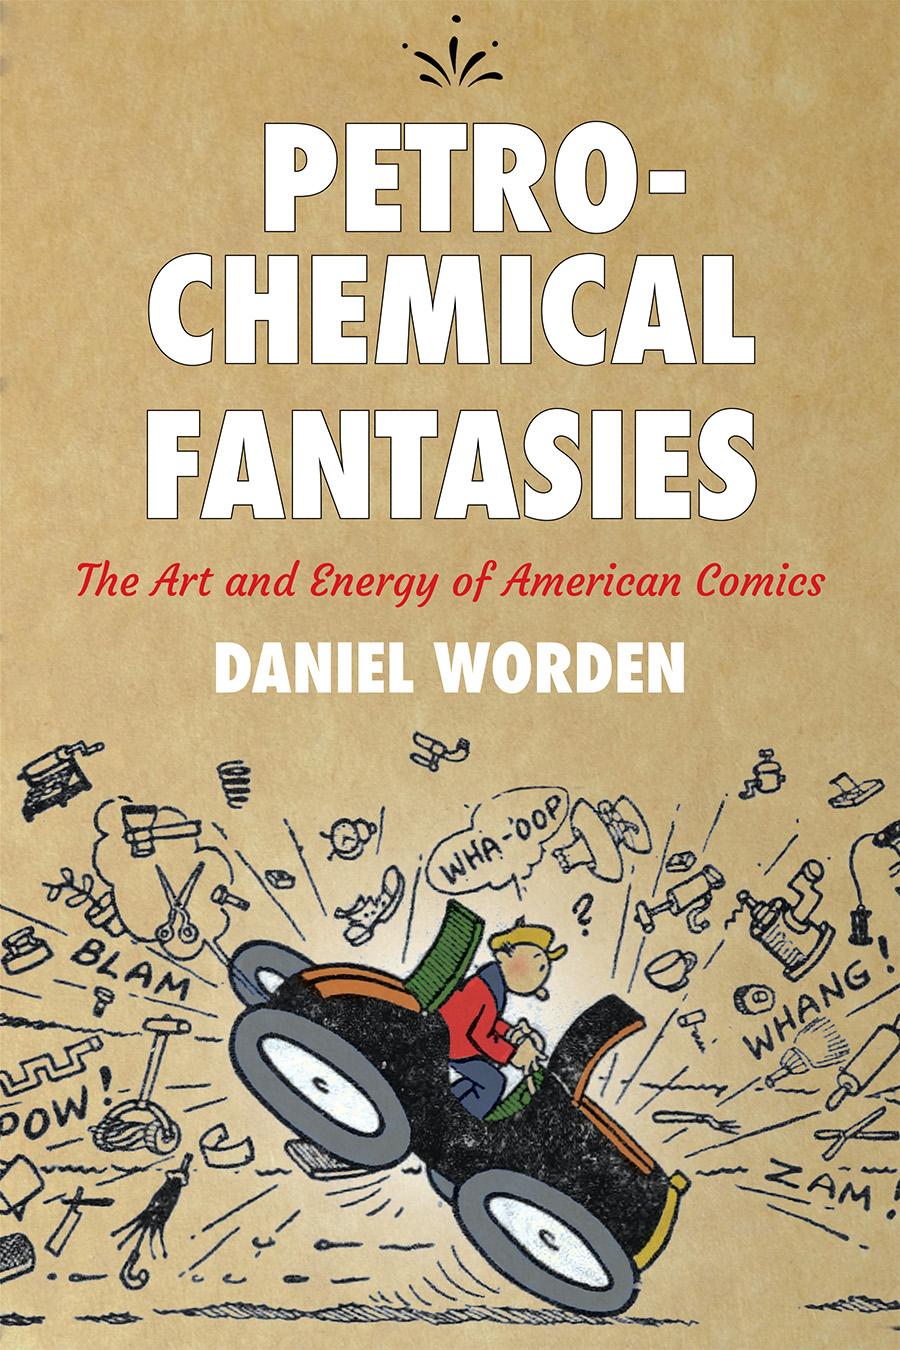 Petrochemical Fantasies: The Art and Energy of American Comics book cover